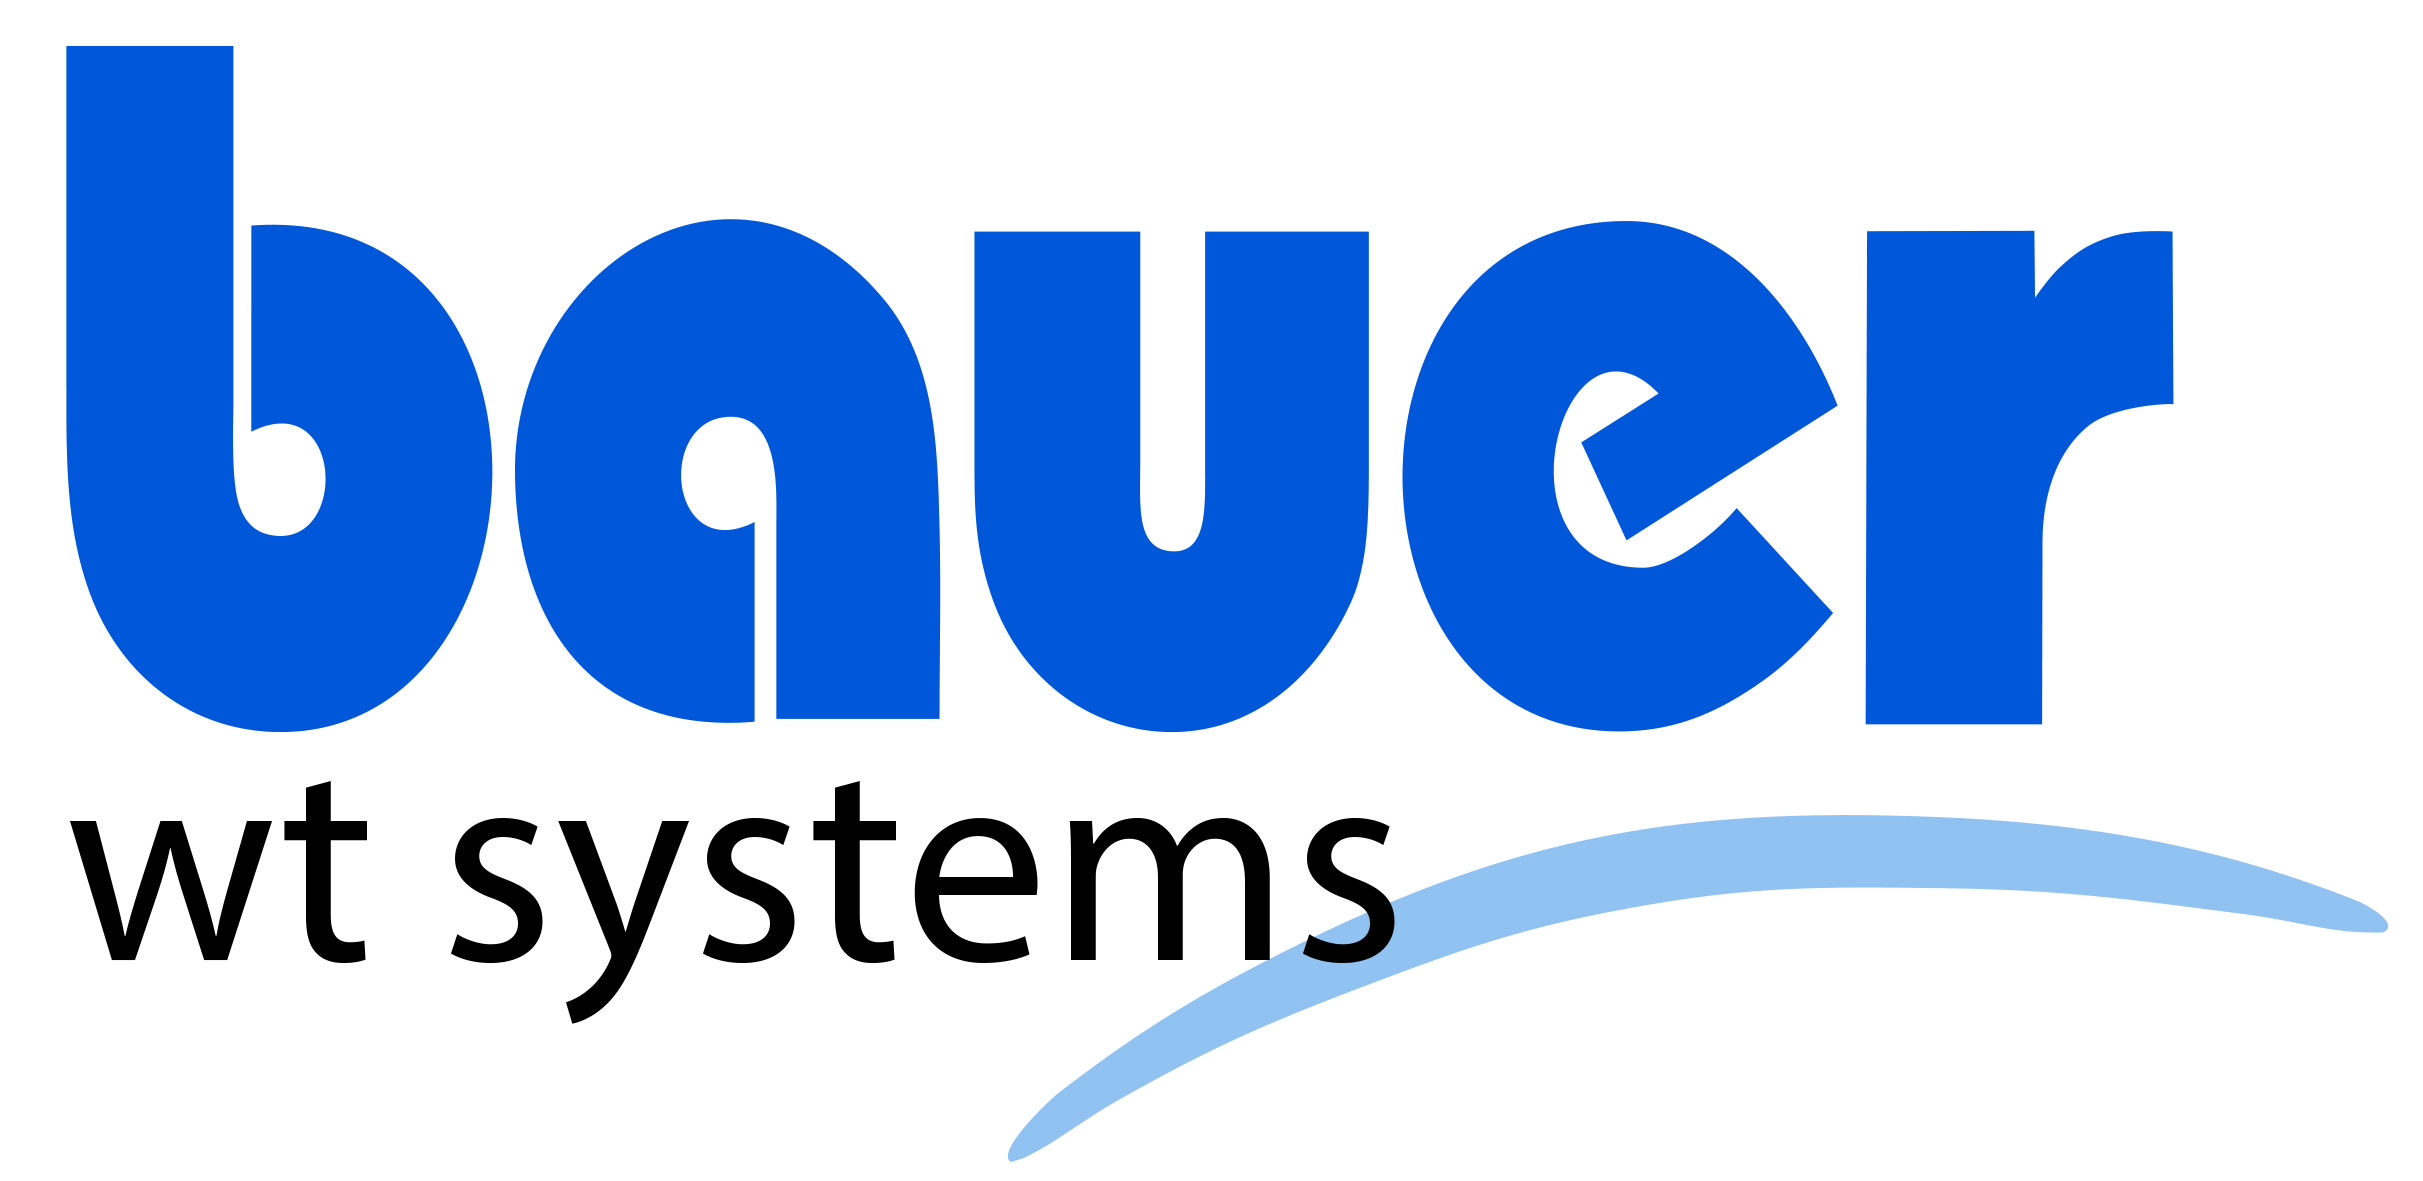 Bauer Watertechnology Systems